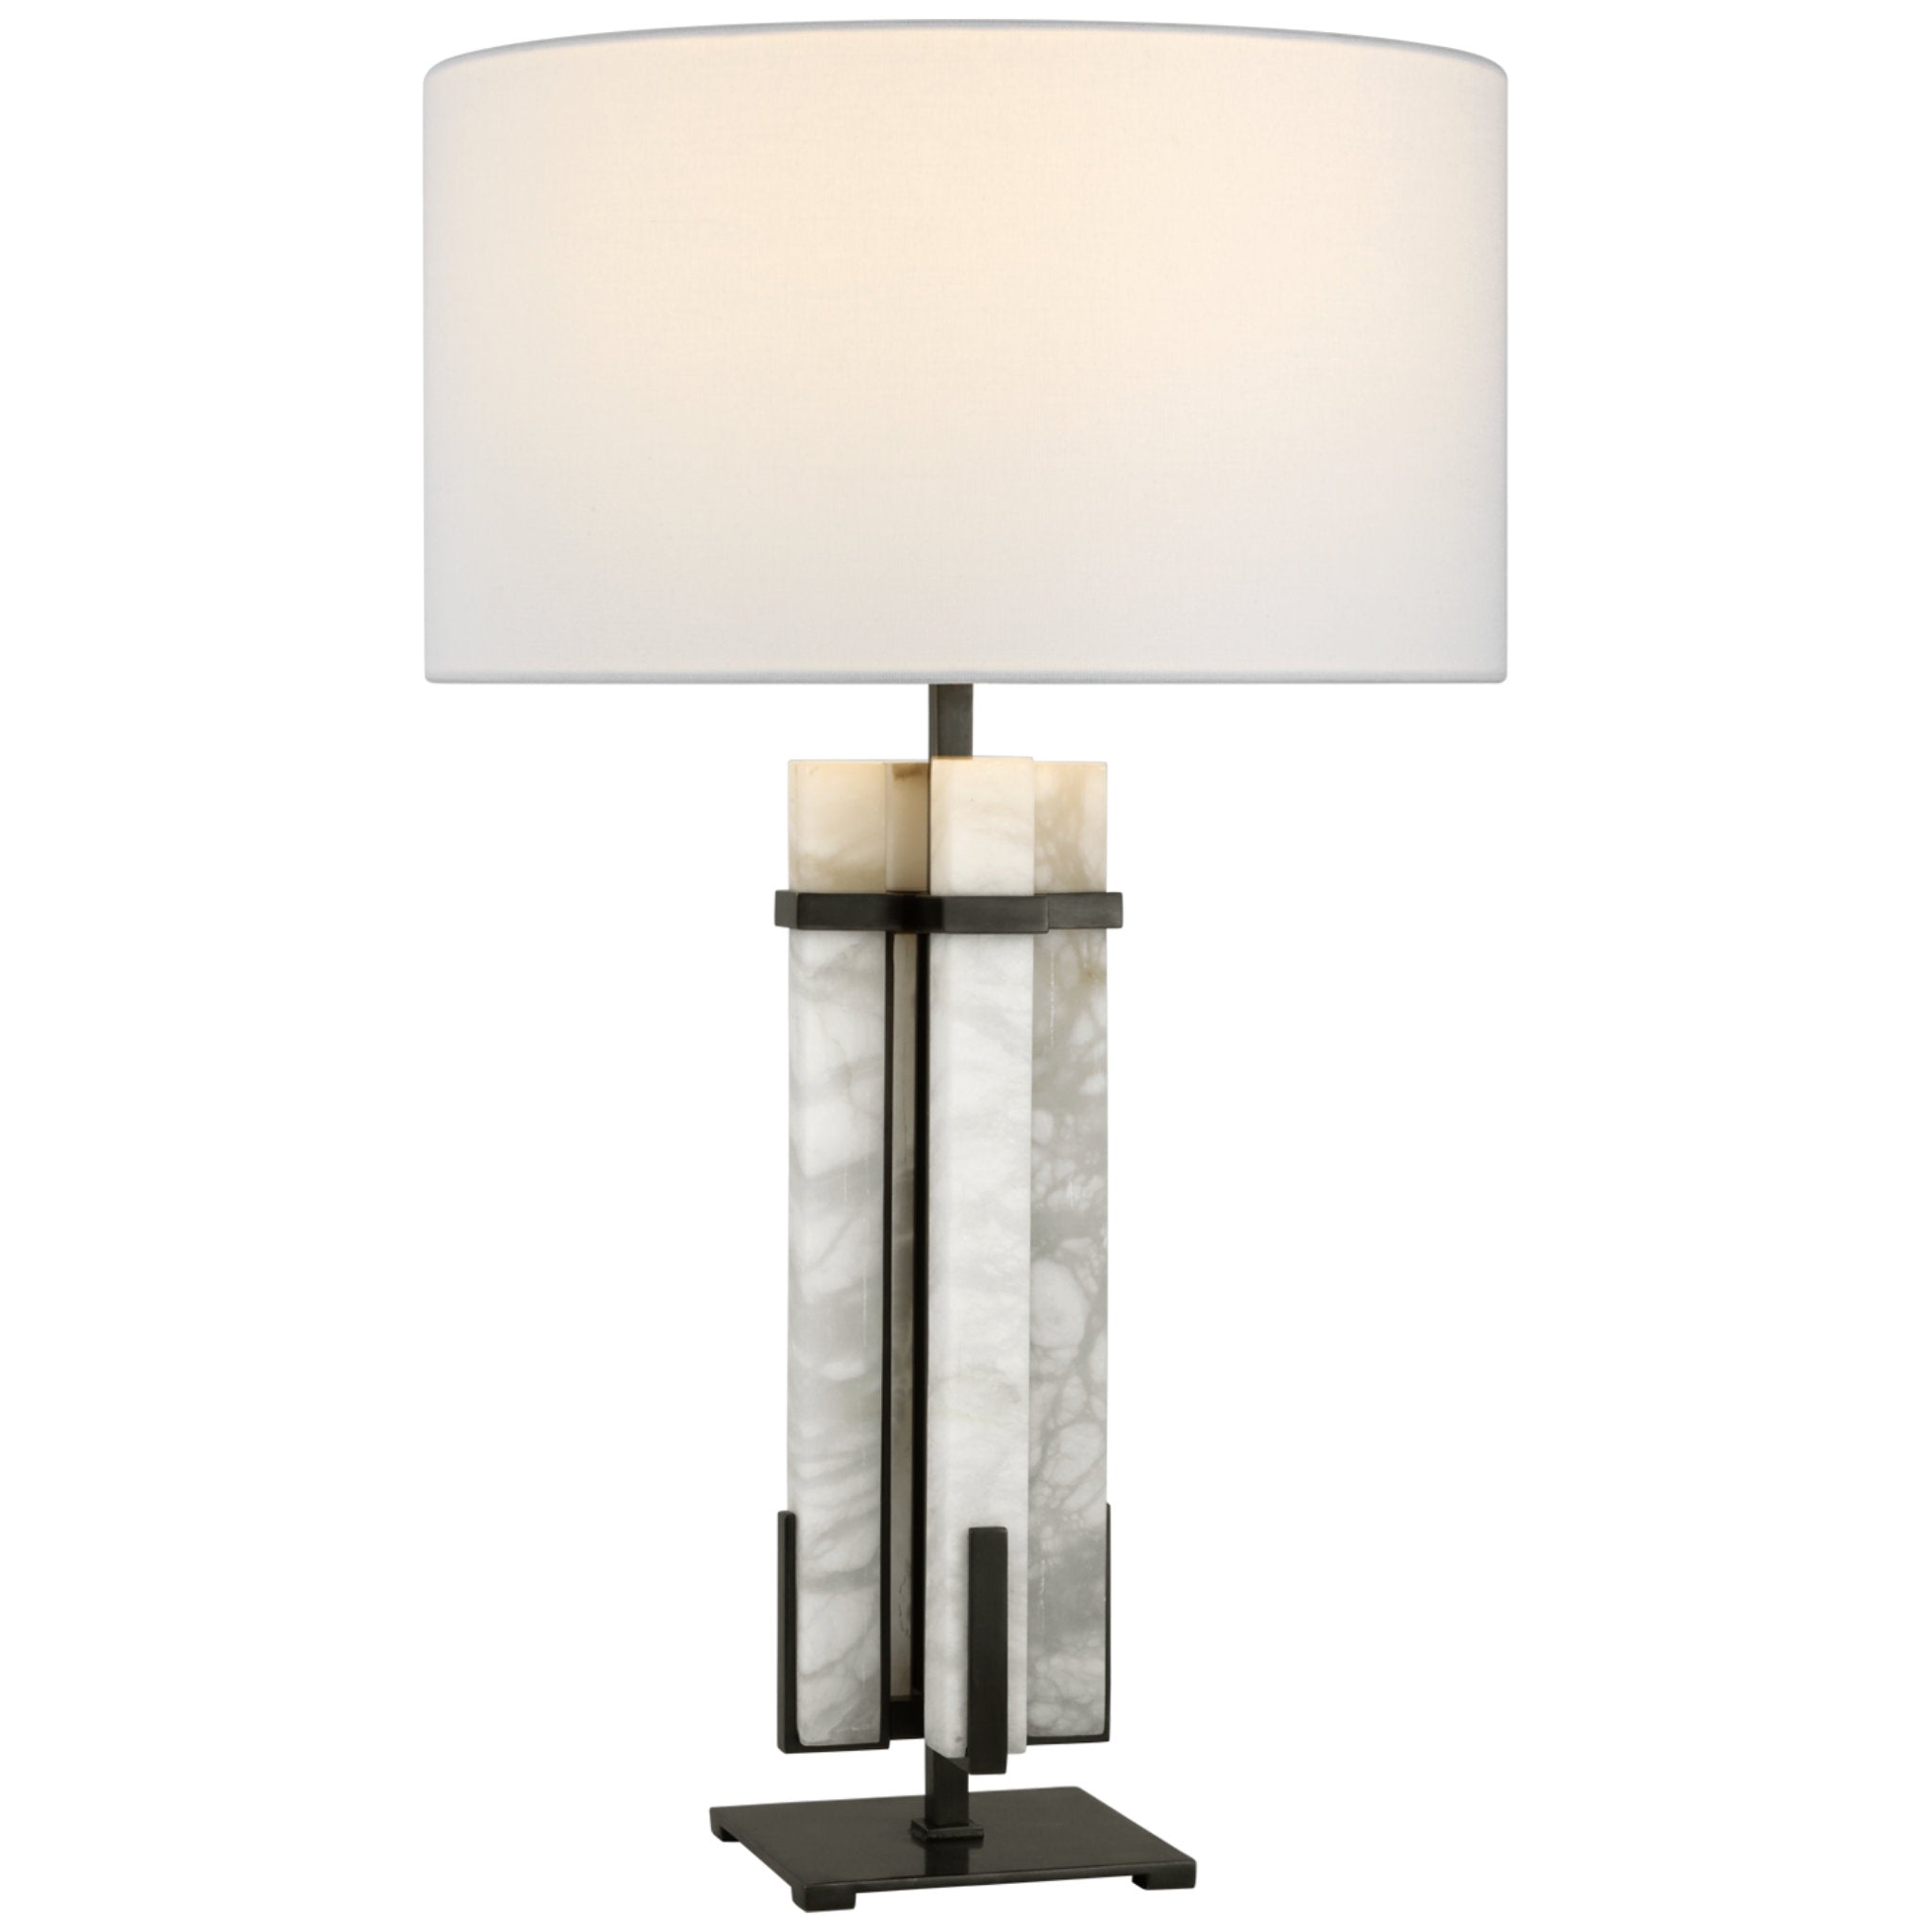 Ian K. Fowler Malik Large Table Lamp in Bronze and Alabaster with Linen Shade